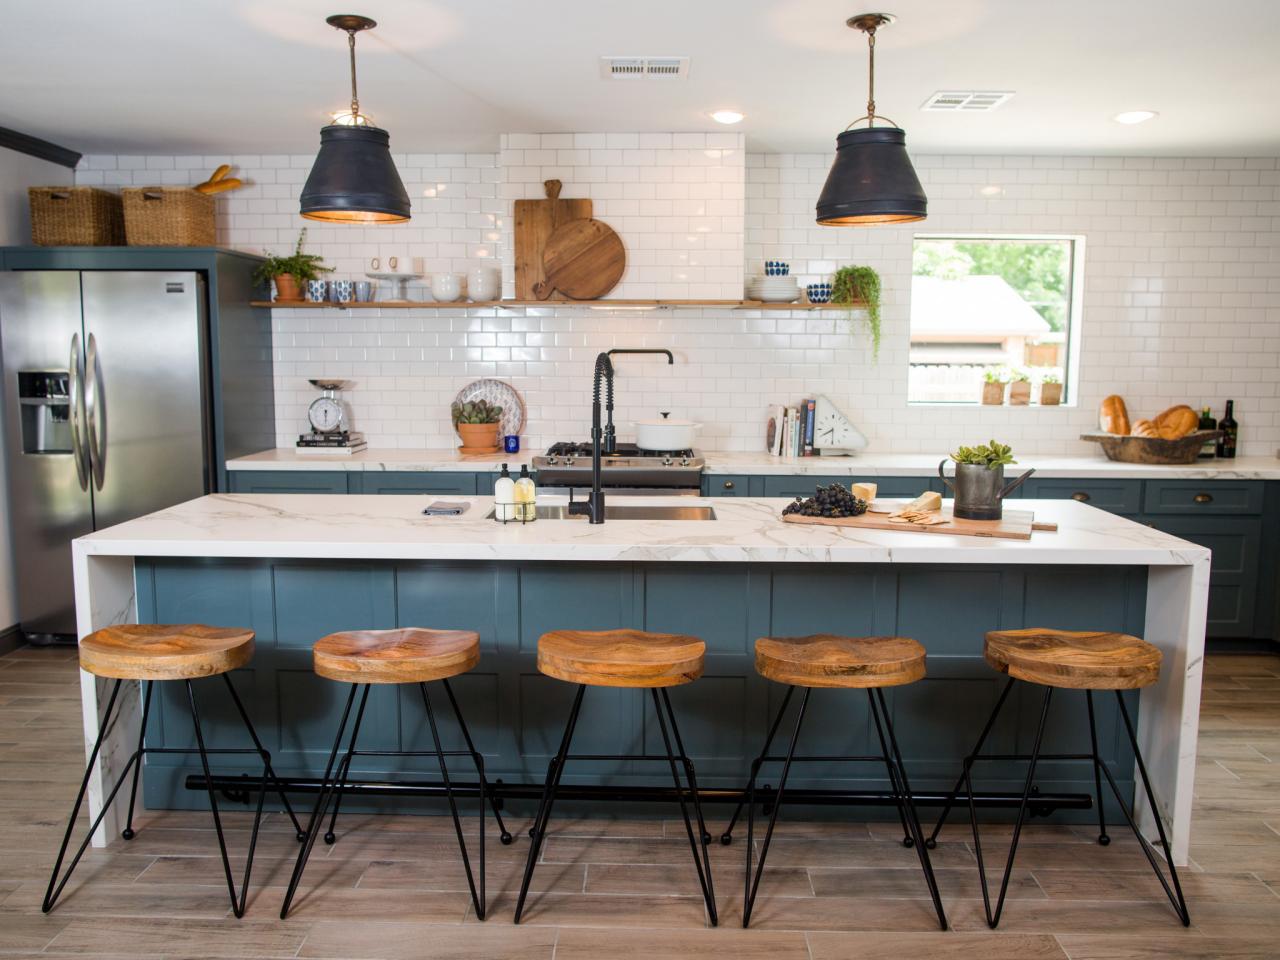 5 Essential Elements in Every Fixer Upper Kitchen